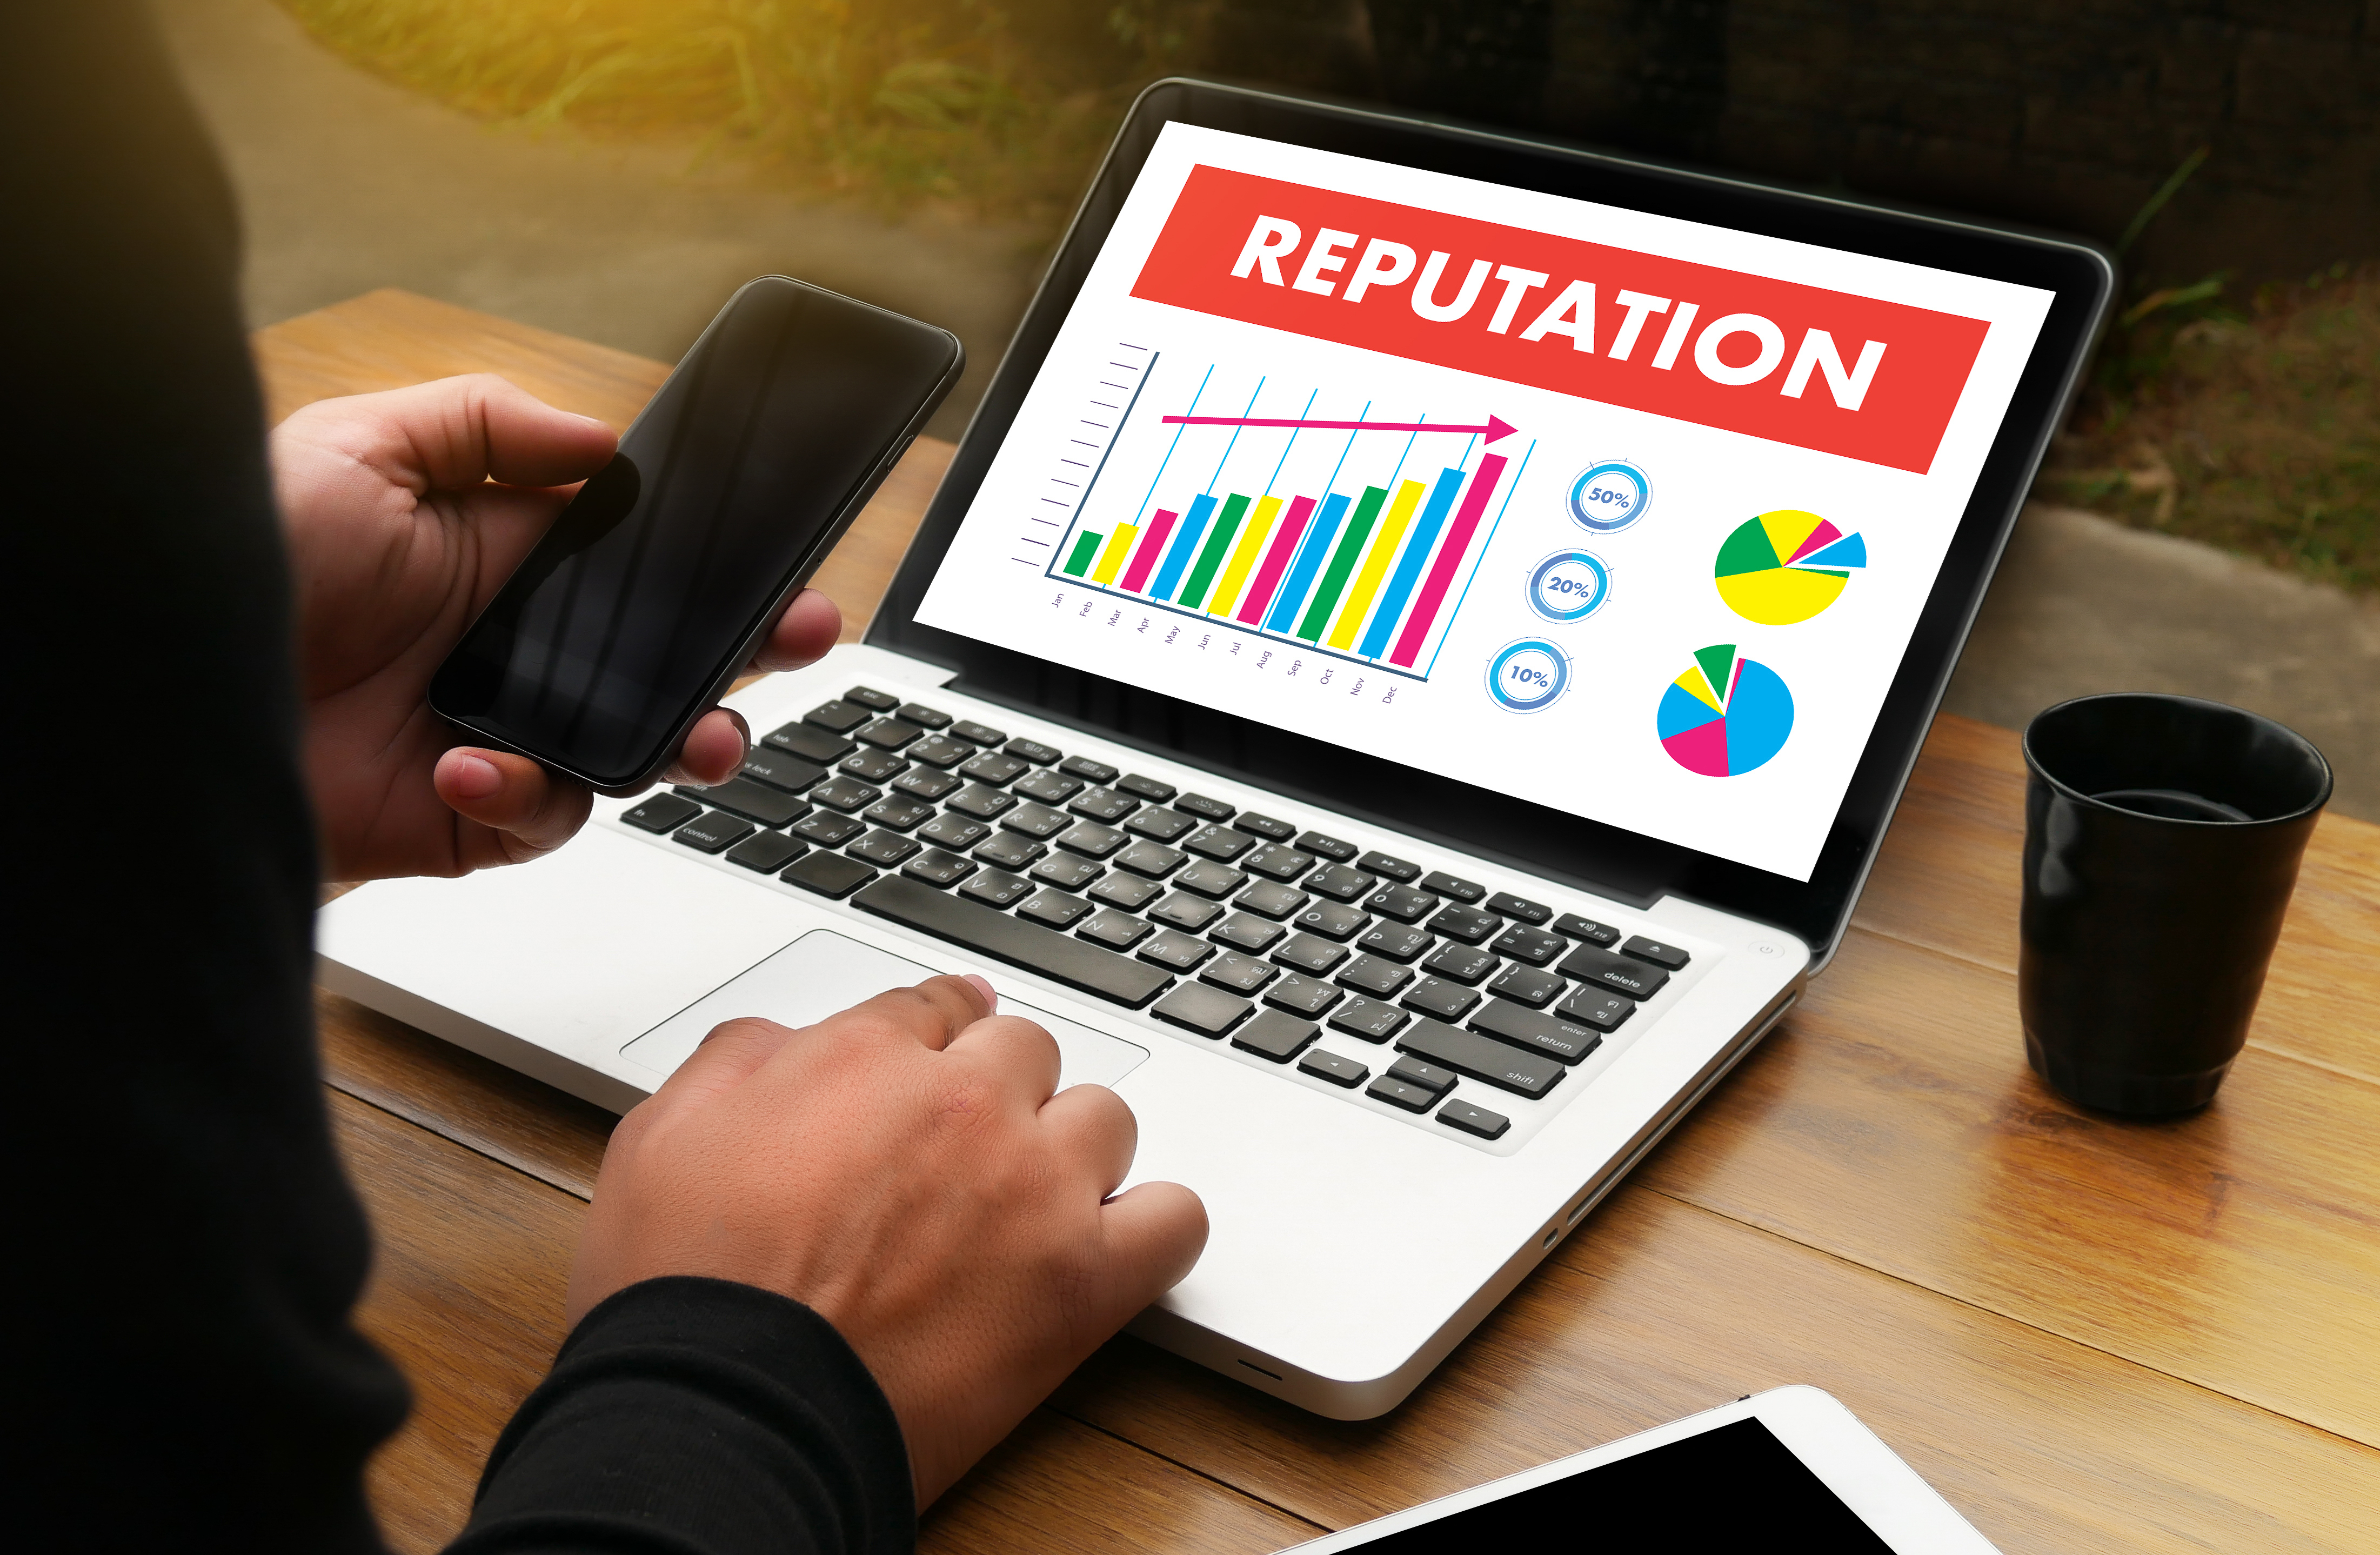 picture of a laptop displaying a line graph titled 'reputation'